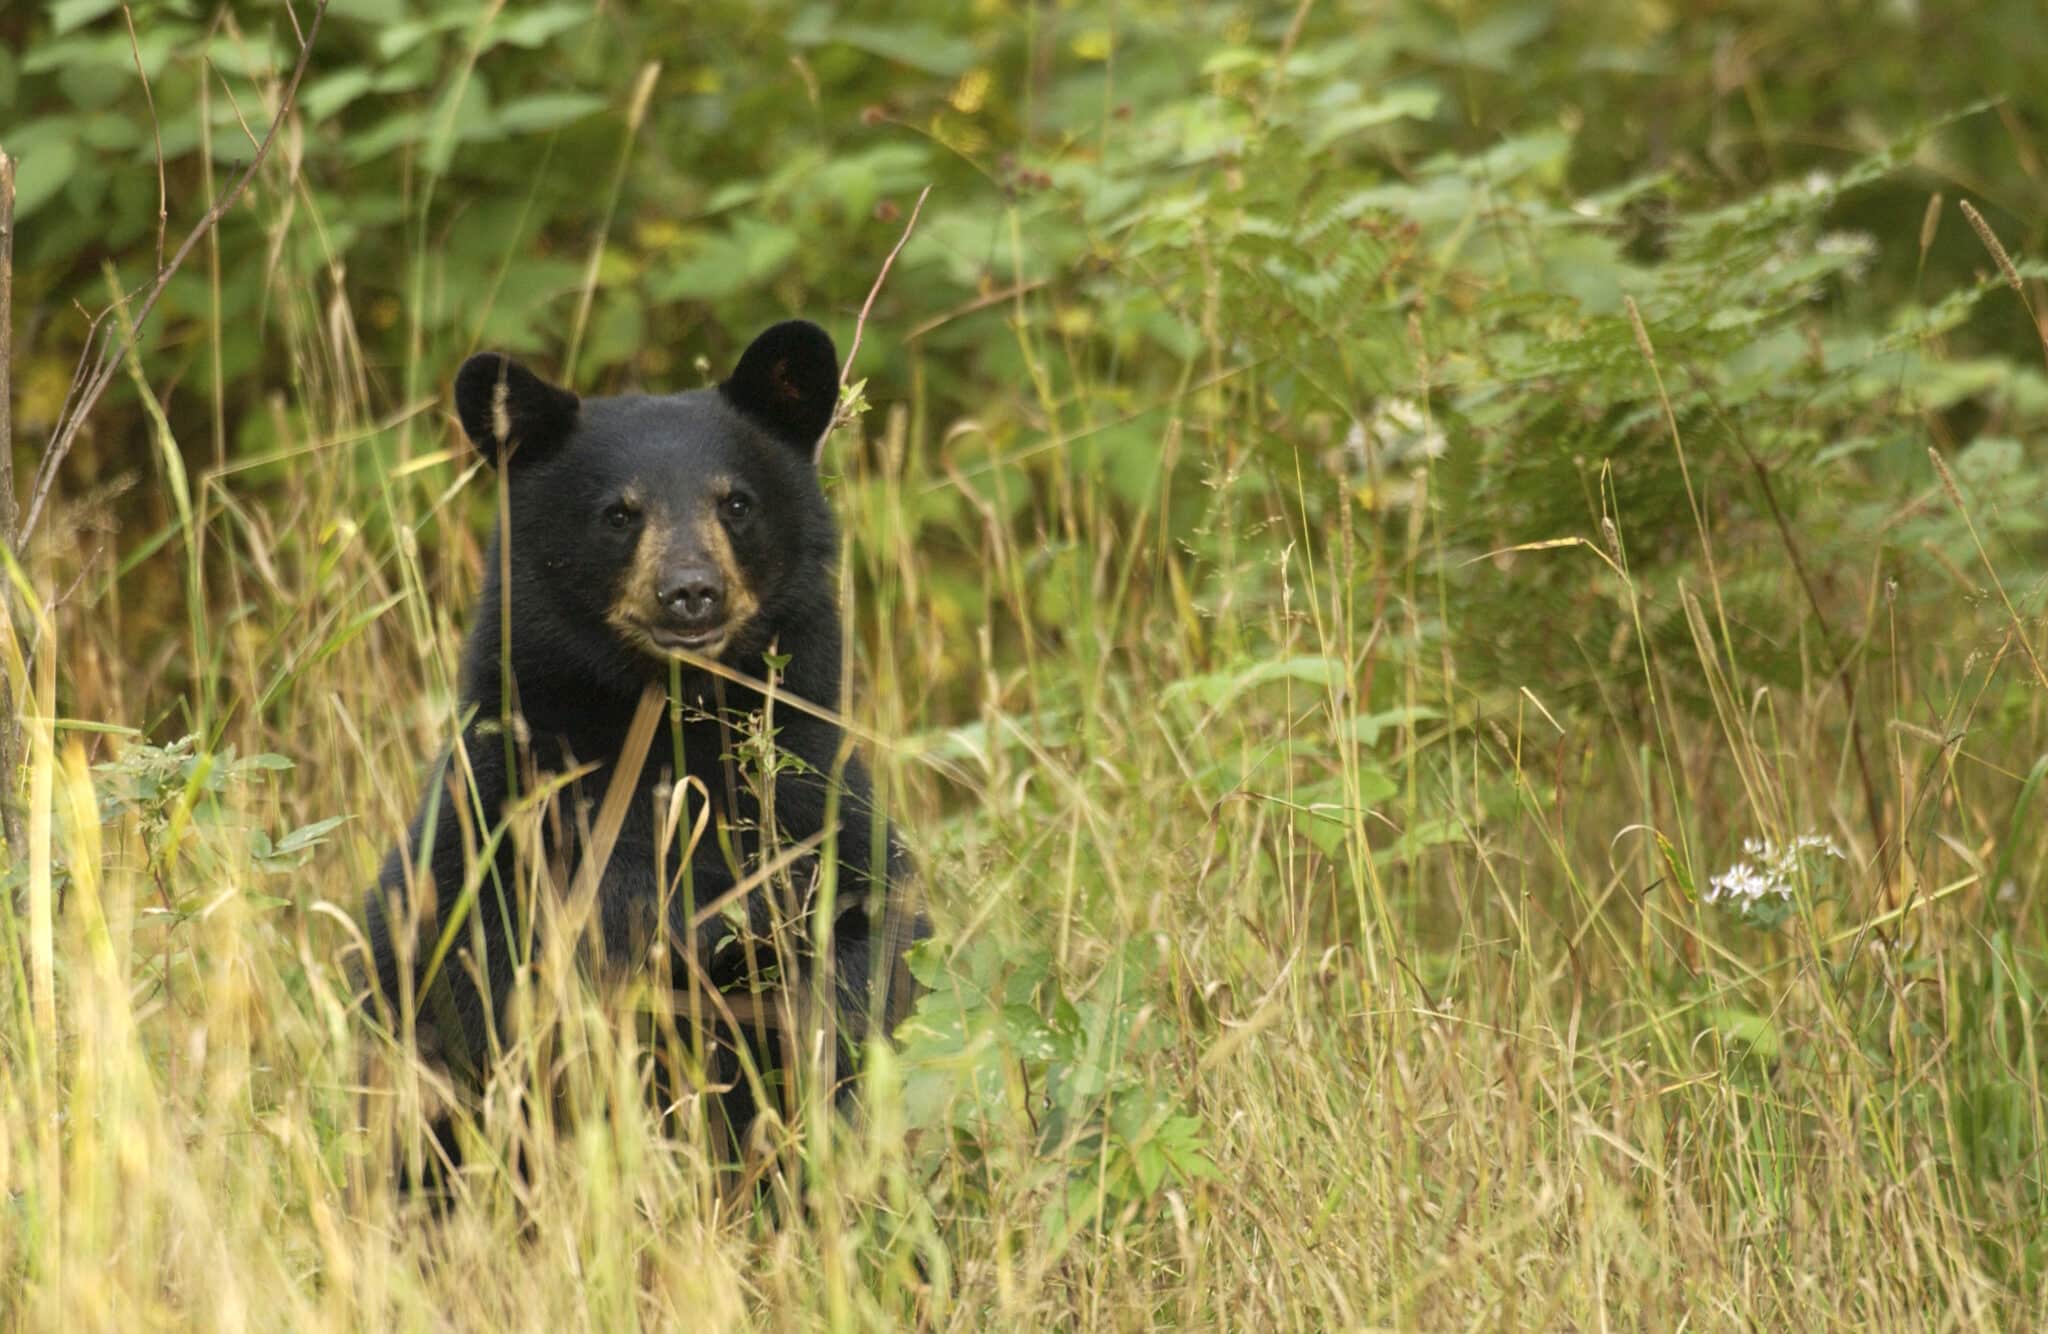 A smiling black bear seated in a Meadow.